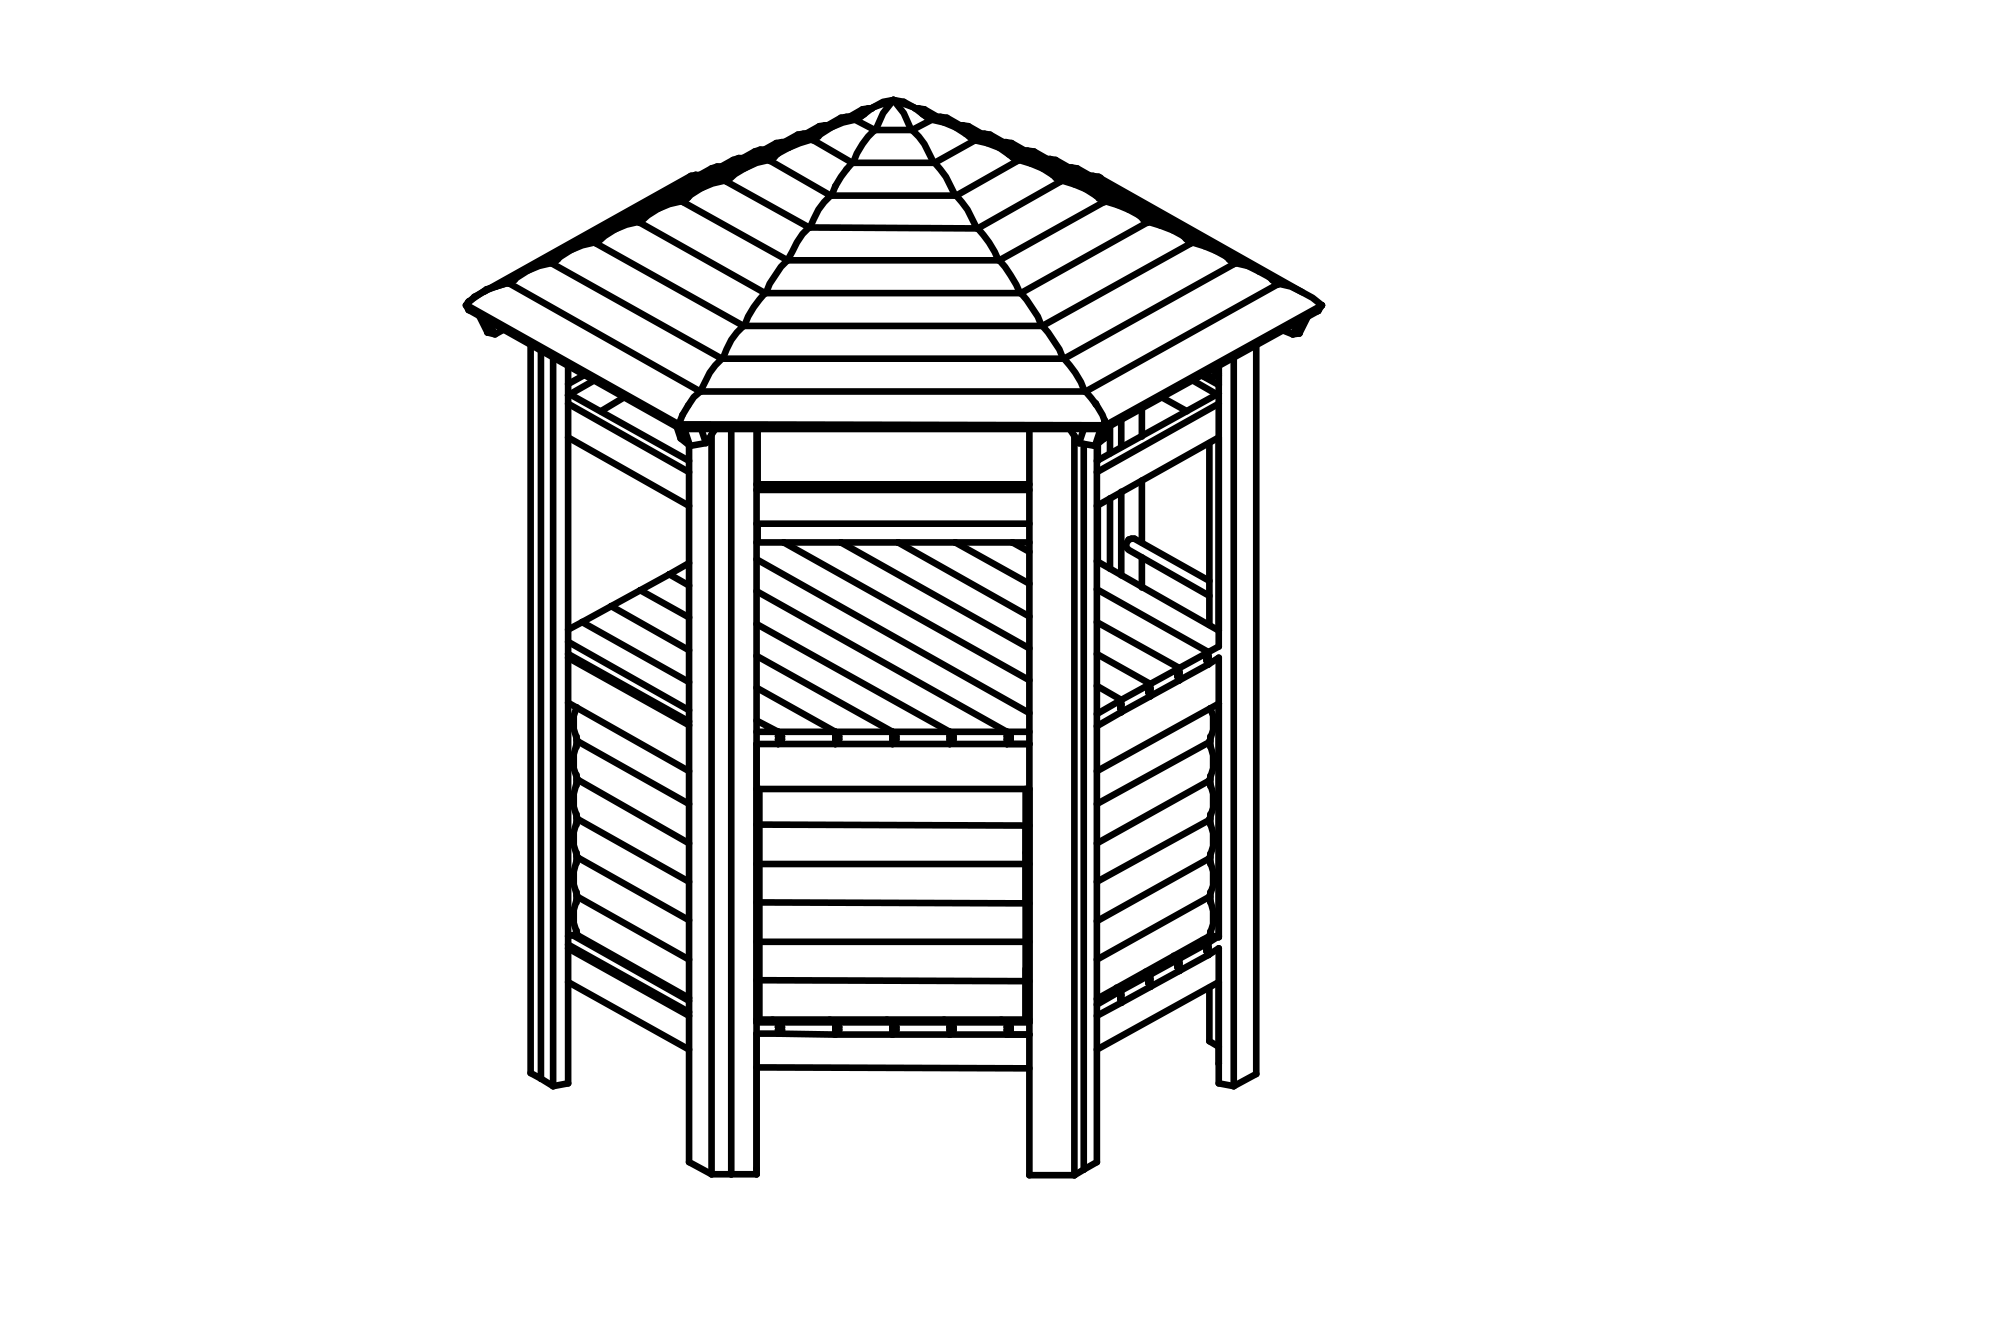 Hexagonal Hut with roof, walls and bench made of non-impregnated mountain larch